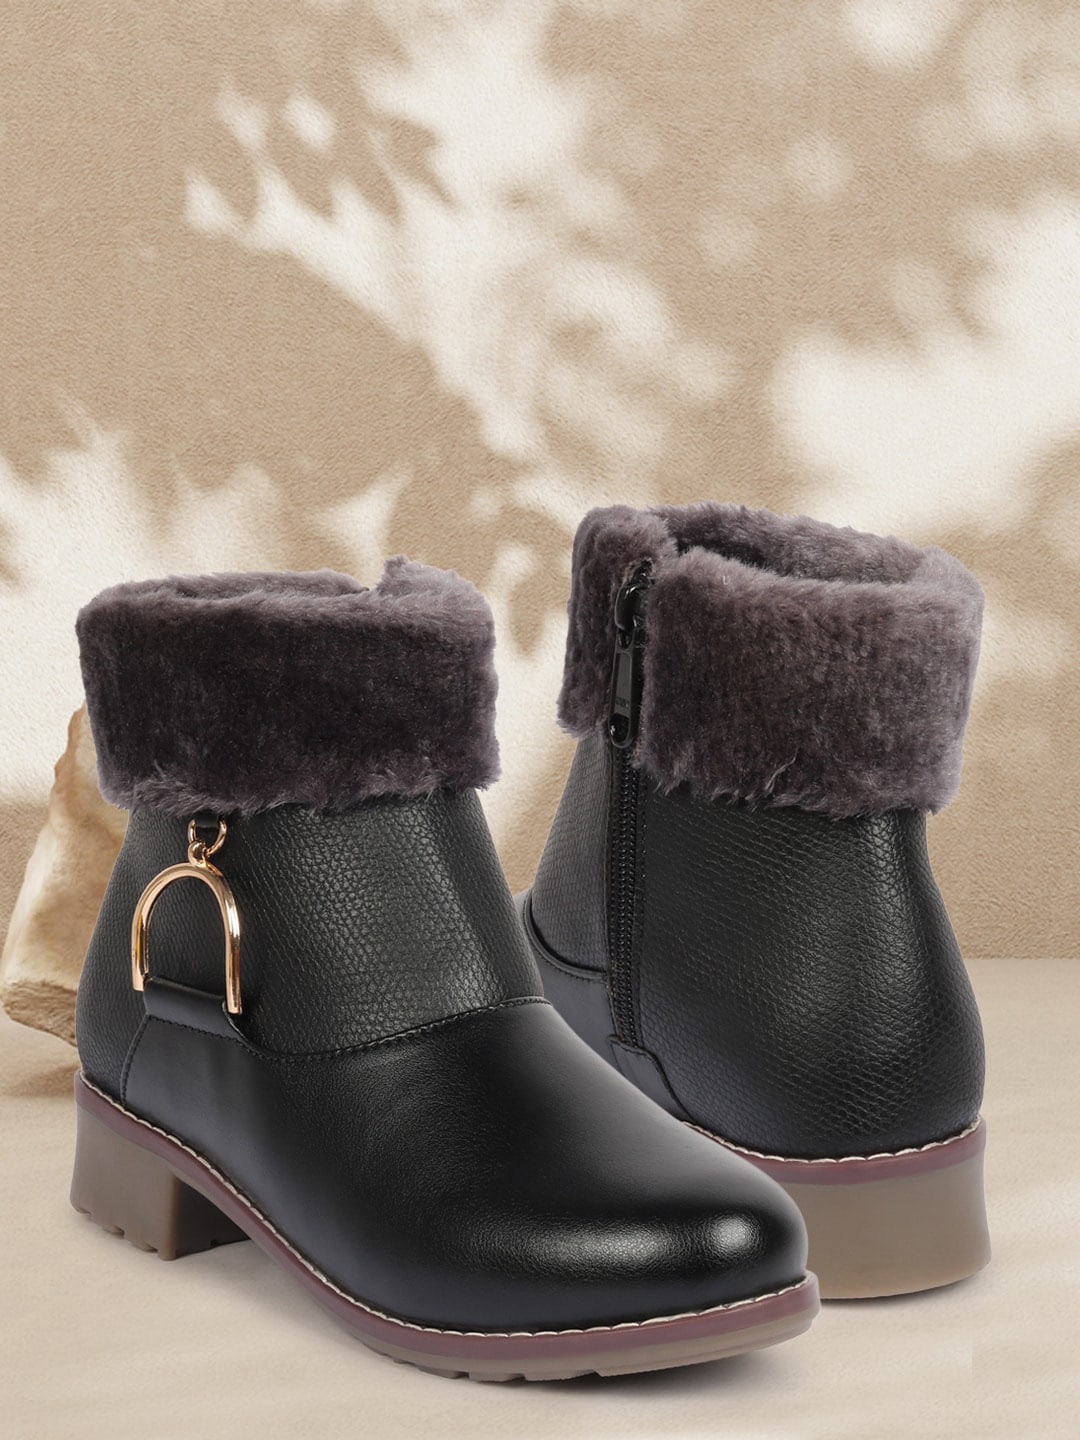 ZAPATOZ Black Self Design Block Heeled Boots With Fur Detail Price in India